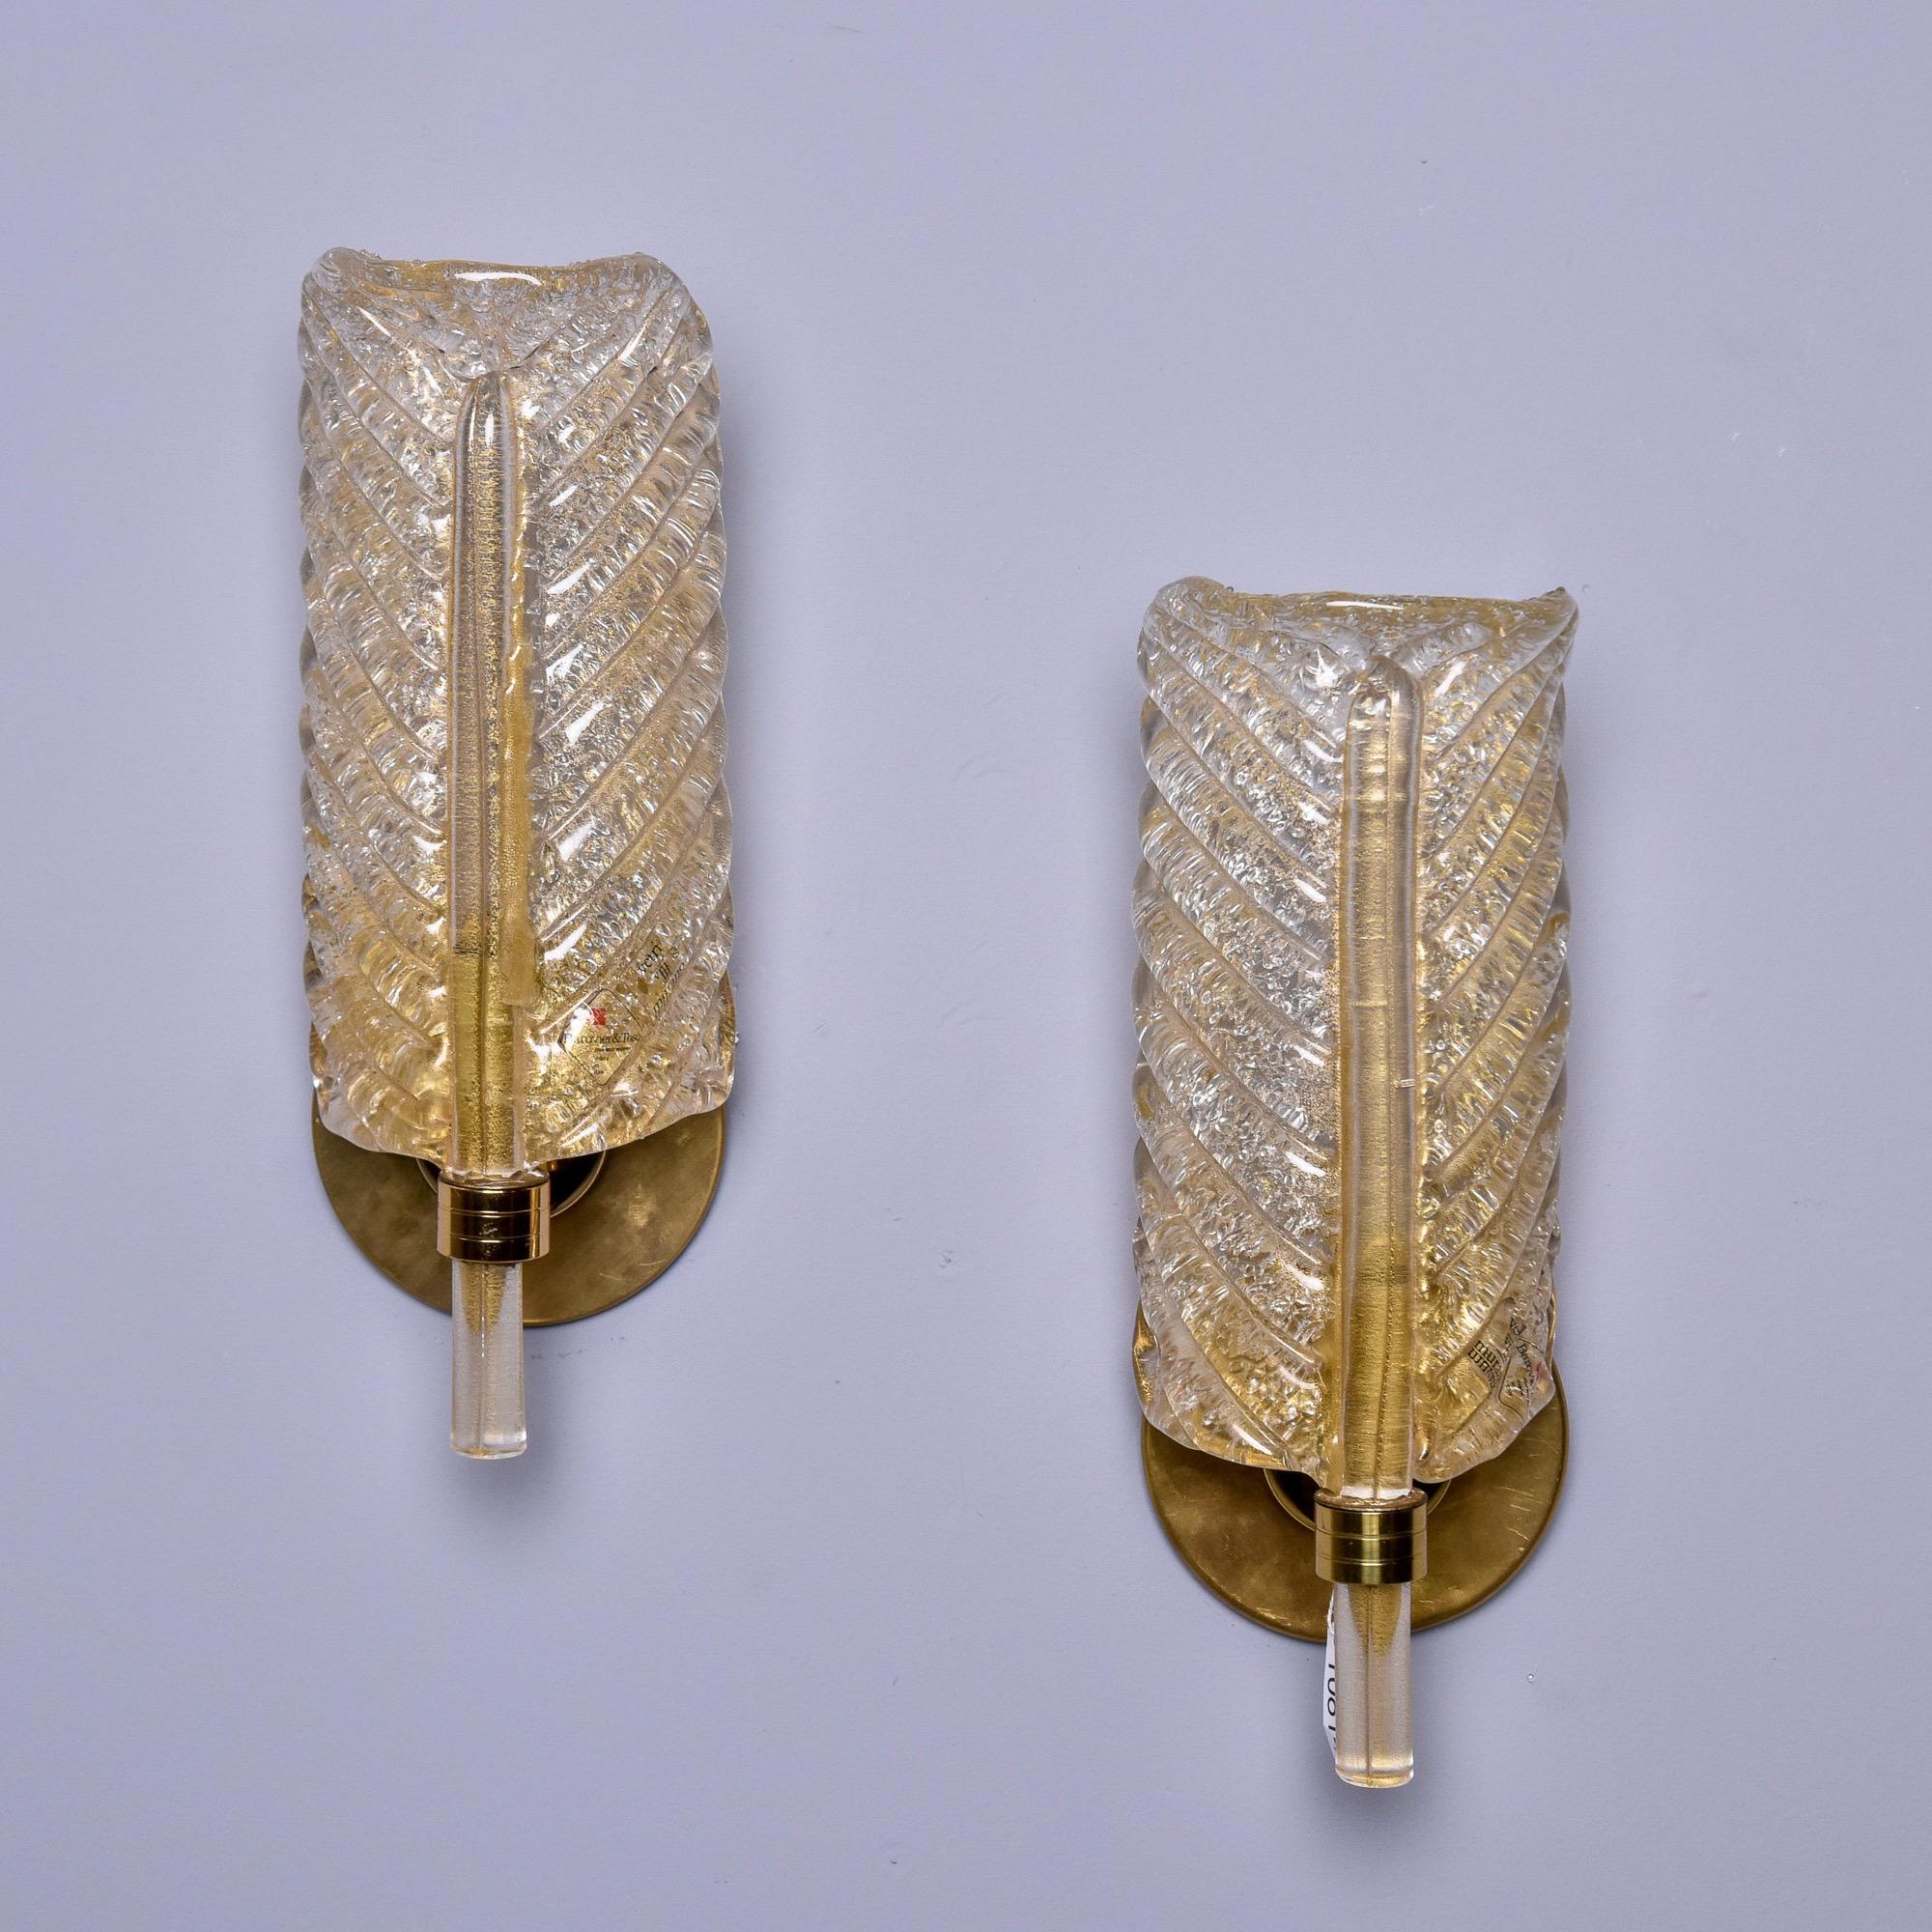 Found in Italy, this pair of circa 1980s Barovier & Toso leaf or feather form sconces date from the 1980s. Clear Murano glass with gold inclusions, polished brass back plates and hardware. Each sconce has a single, standard sized socket that has